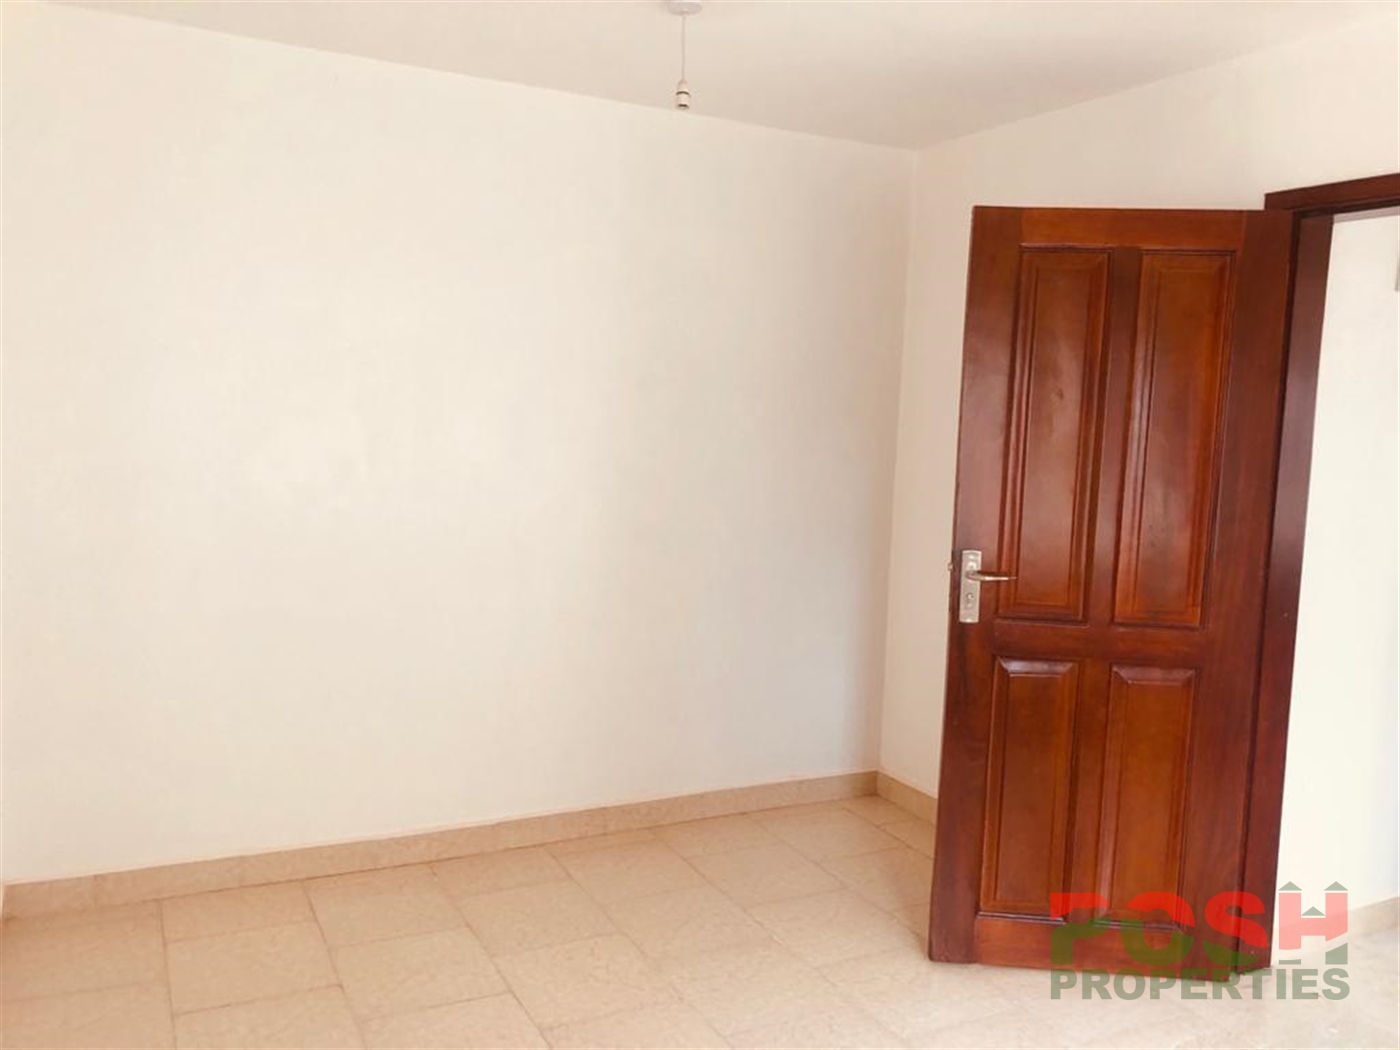 Cottage for rent in Gayaza Wakiso